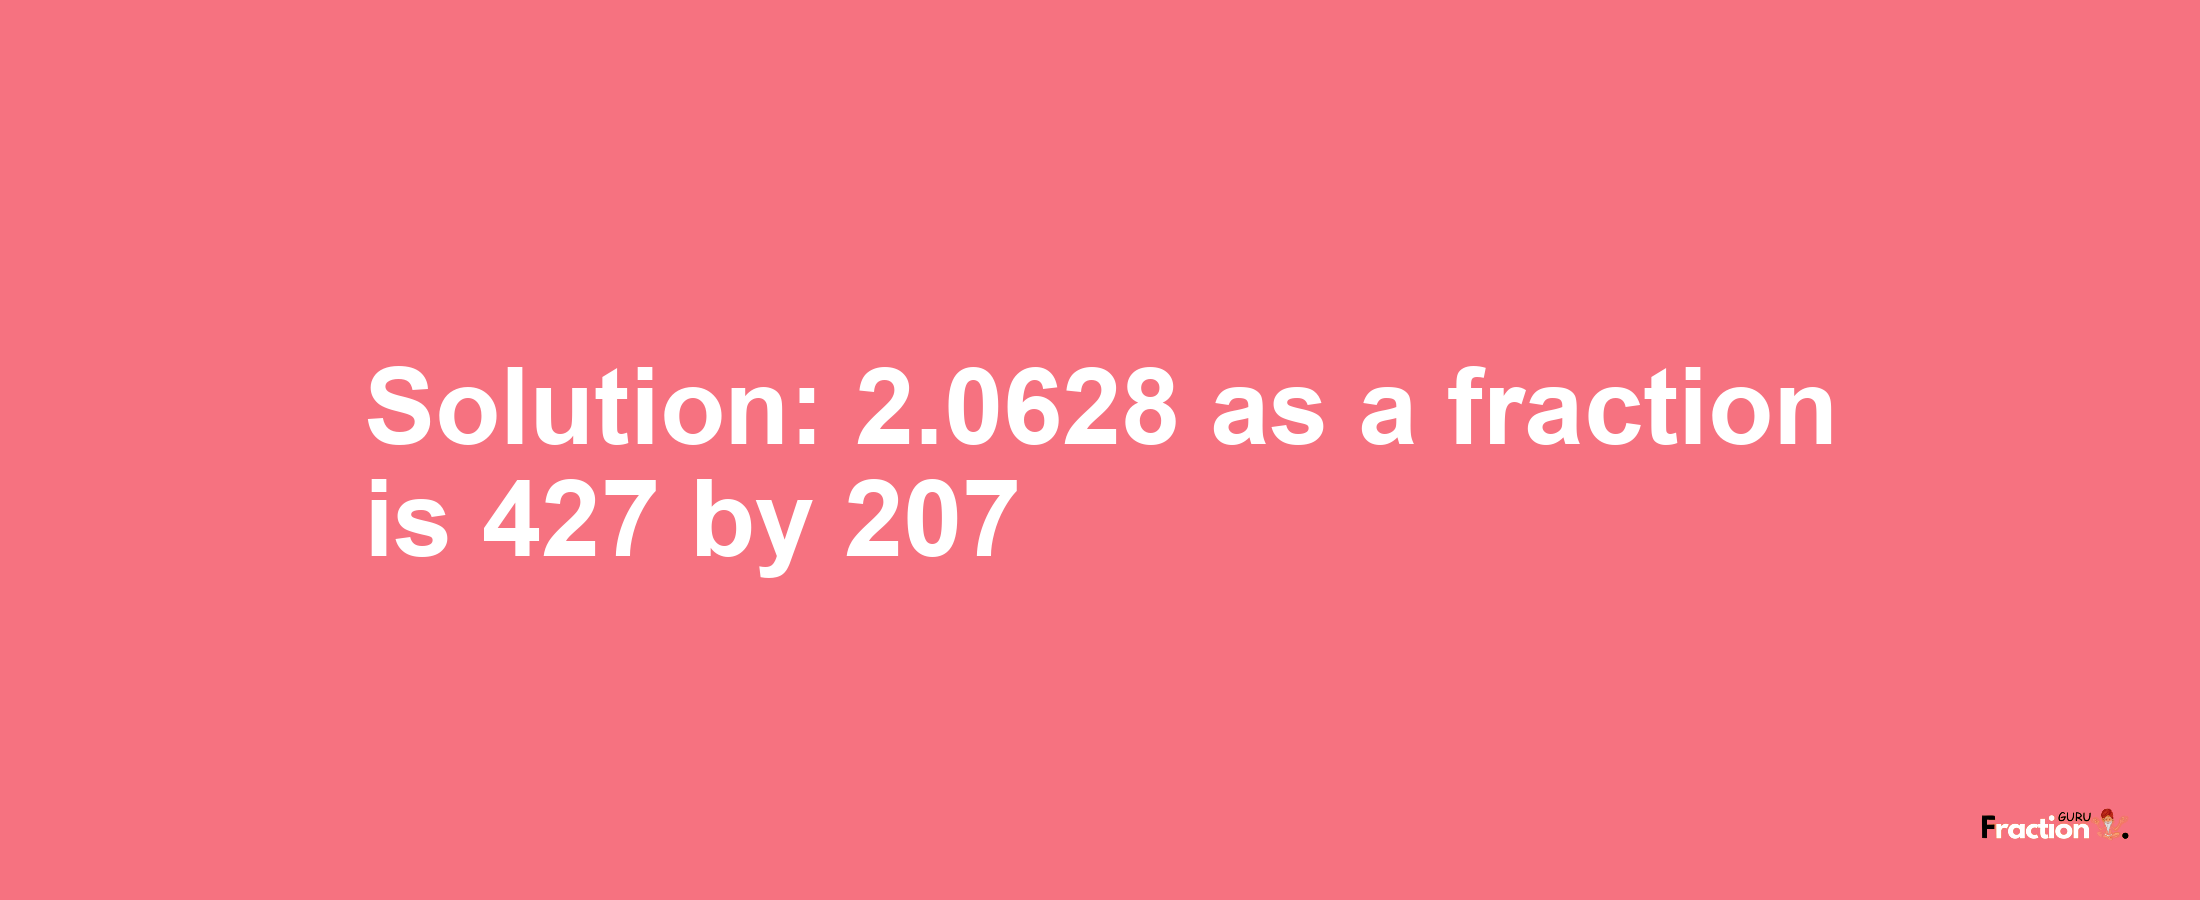 Solution:2.0628 as a fraction is 427/207